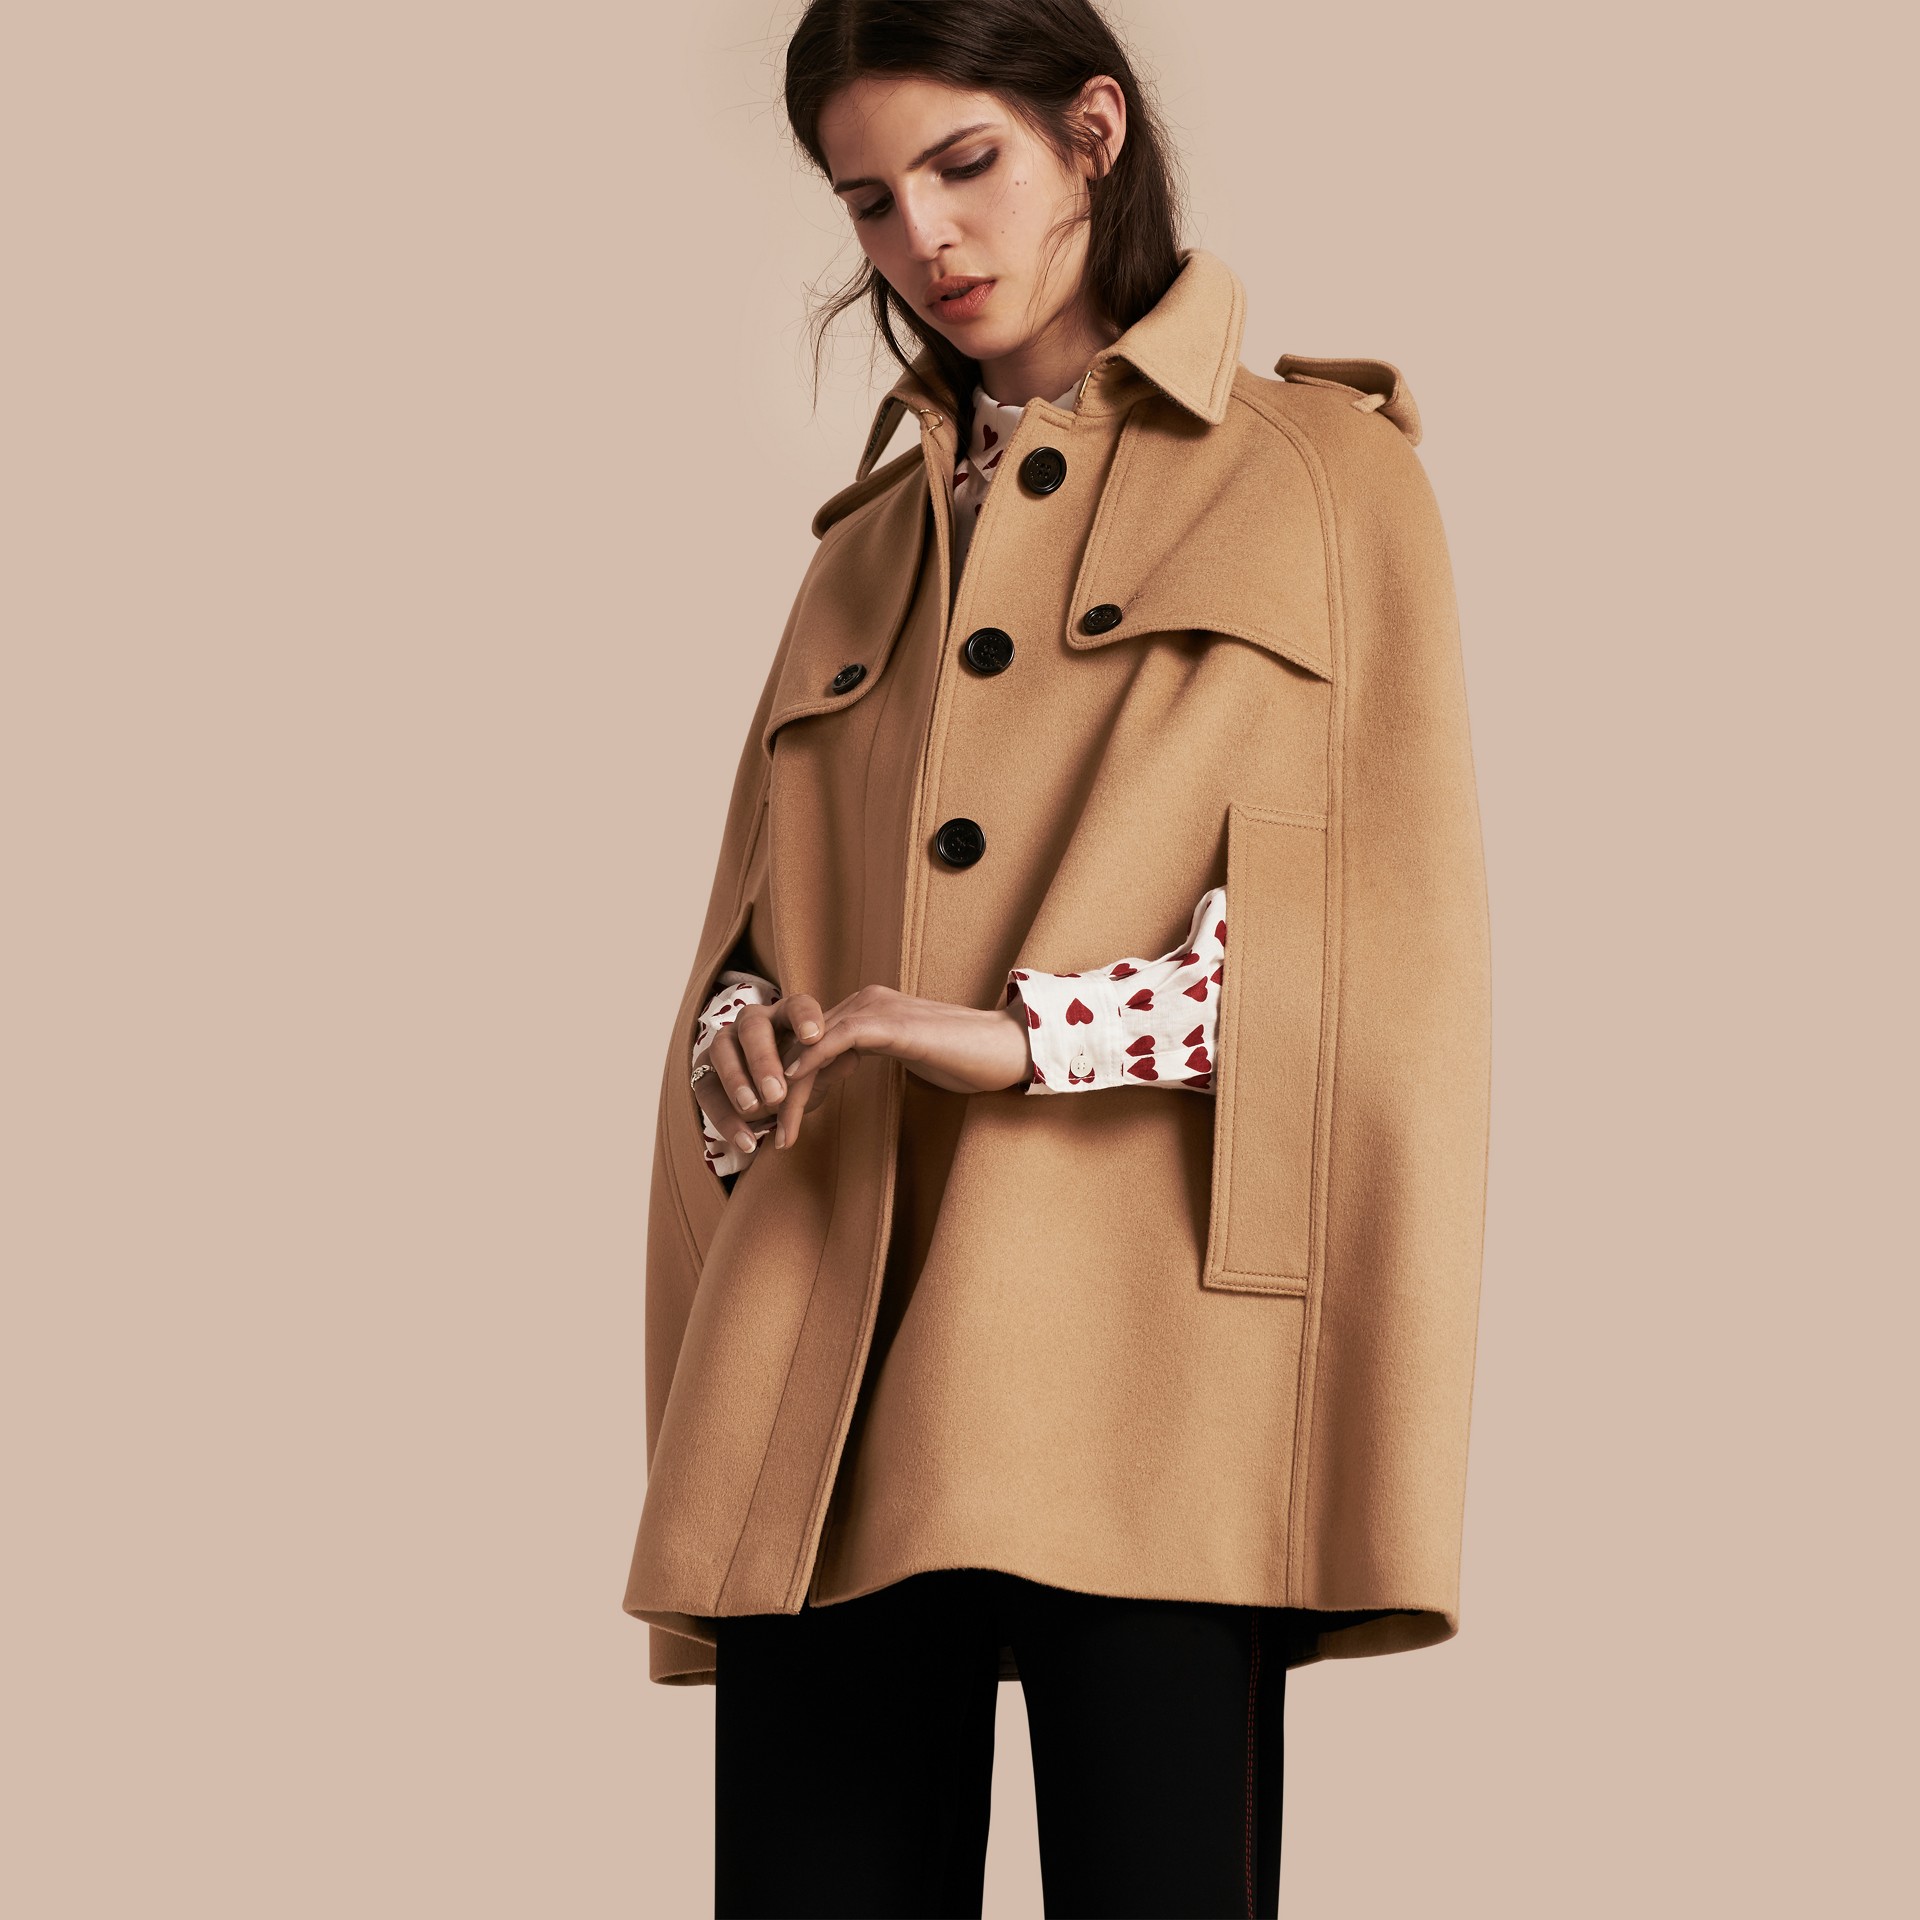 Wool Cashmere Blend Trench Cape in Camel - Women | Burberry Hong Kong